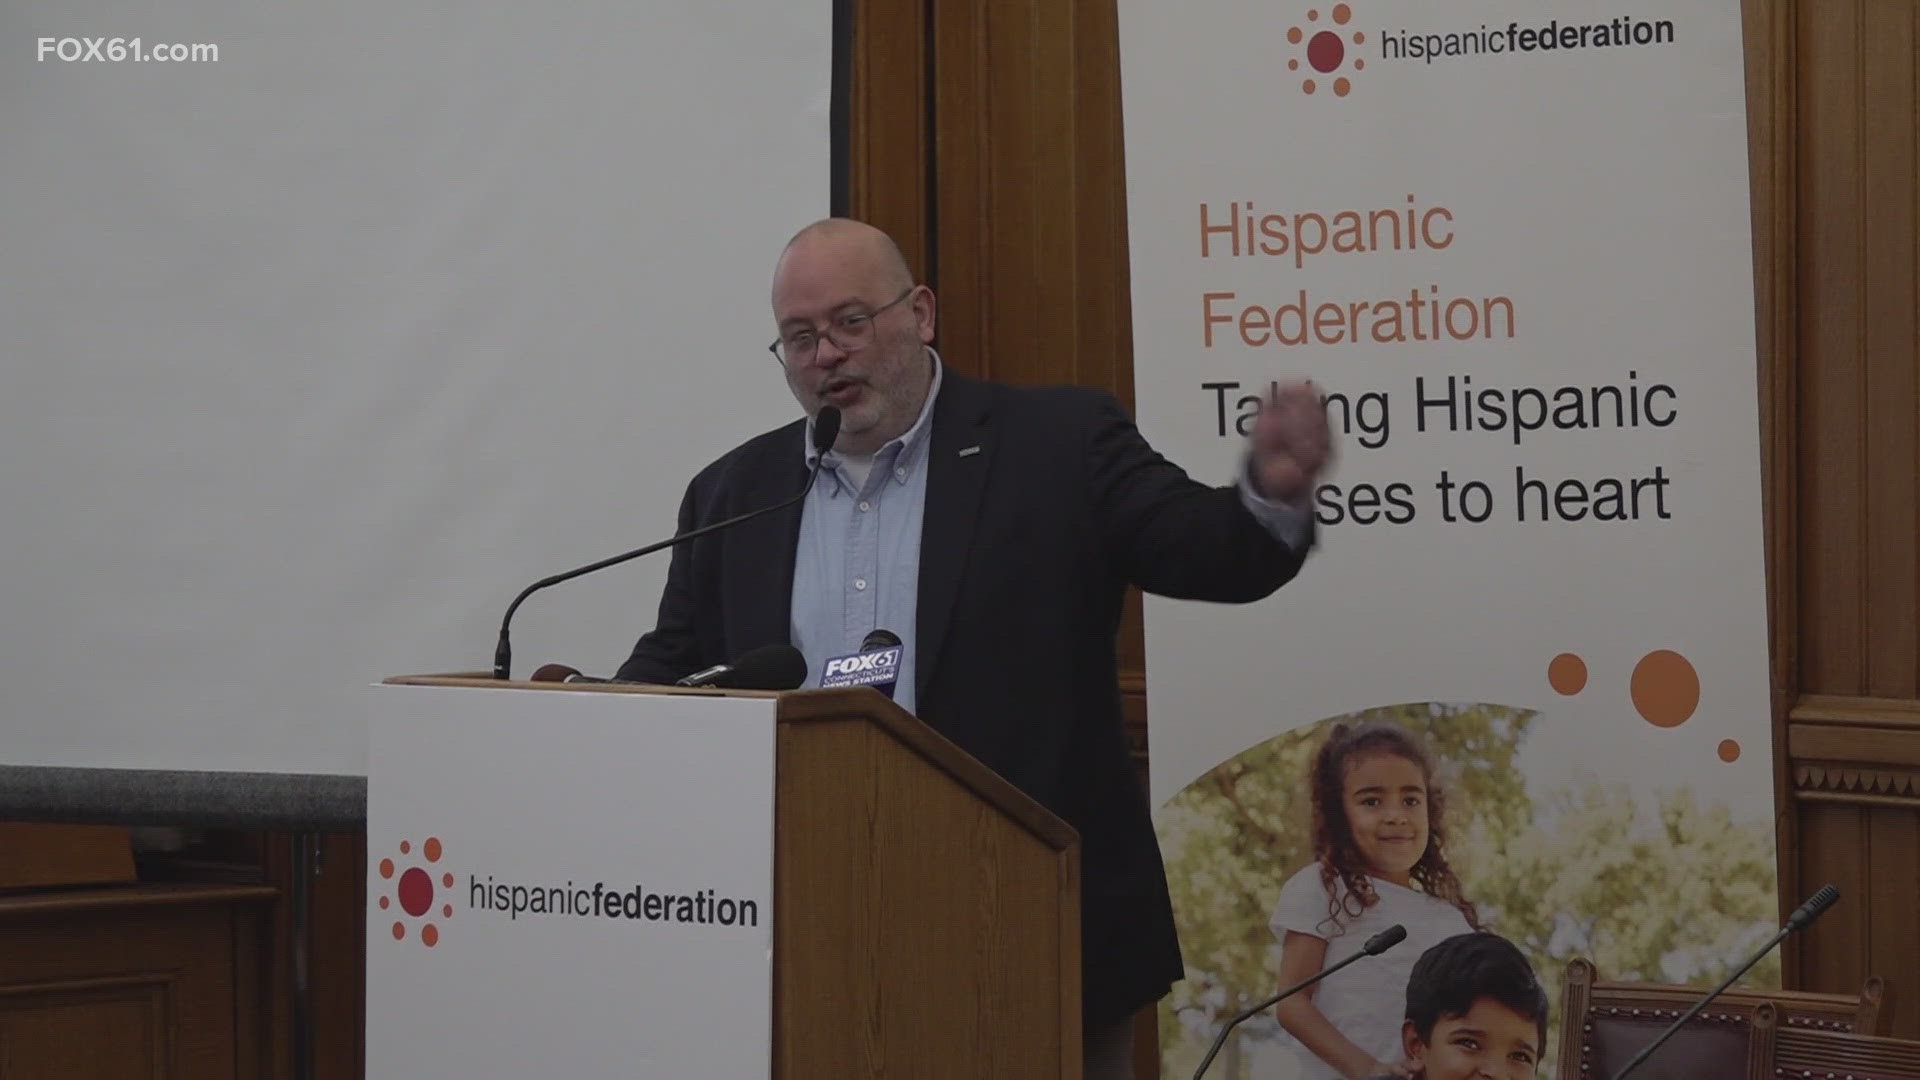 The annual event is meant to empower the state's Latino community. Attendees discussed issues focused on financial equity, home ownership and voter rights.